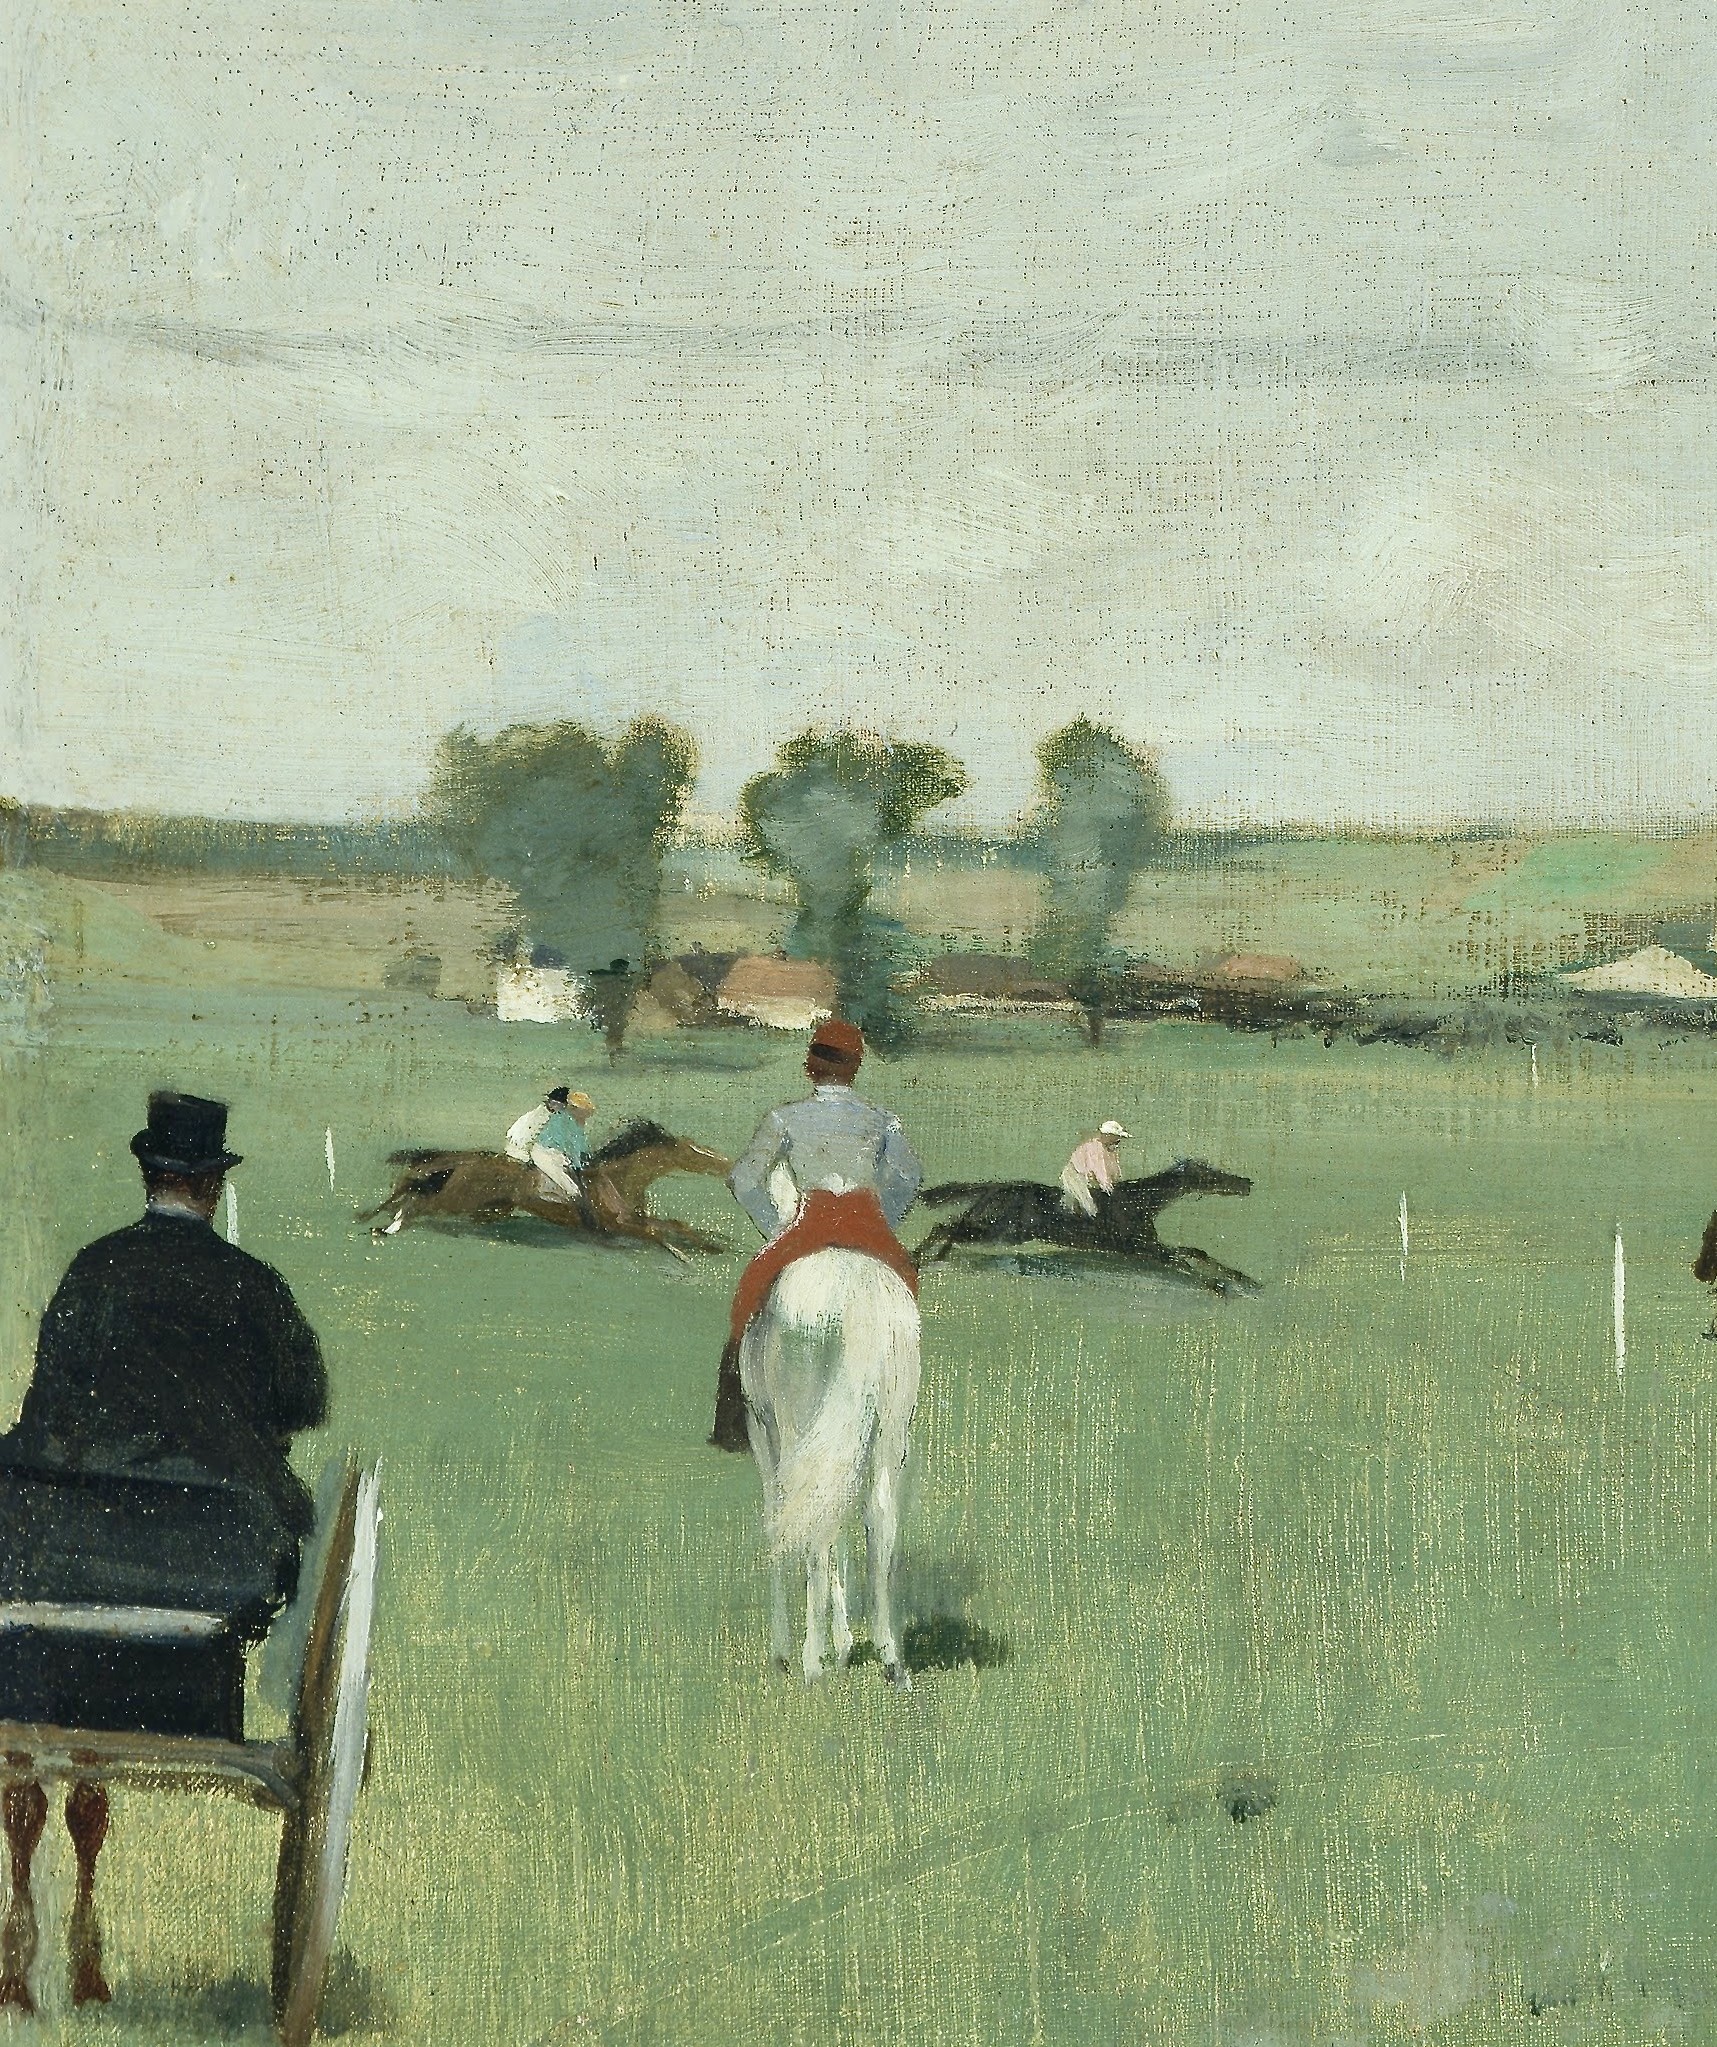 Edgar_Degas_-_At_the_Races_in_the_Countryside_-_Google_Art_Project